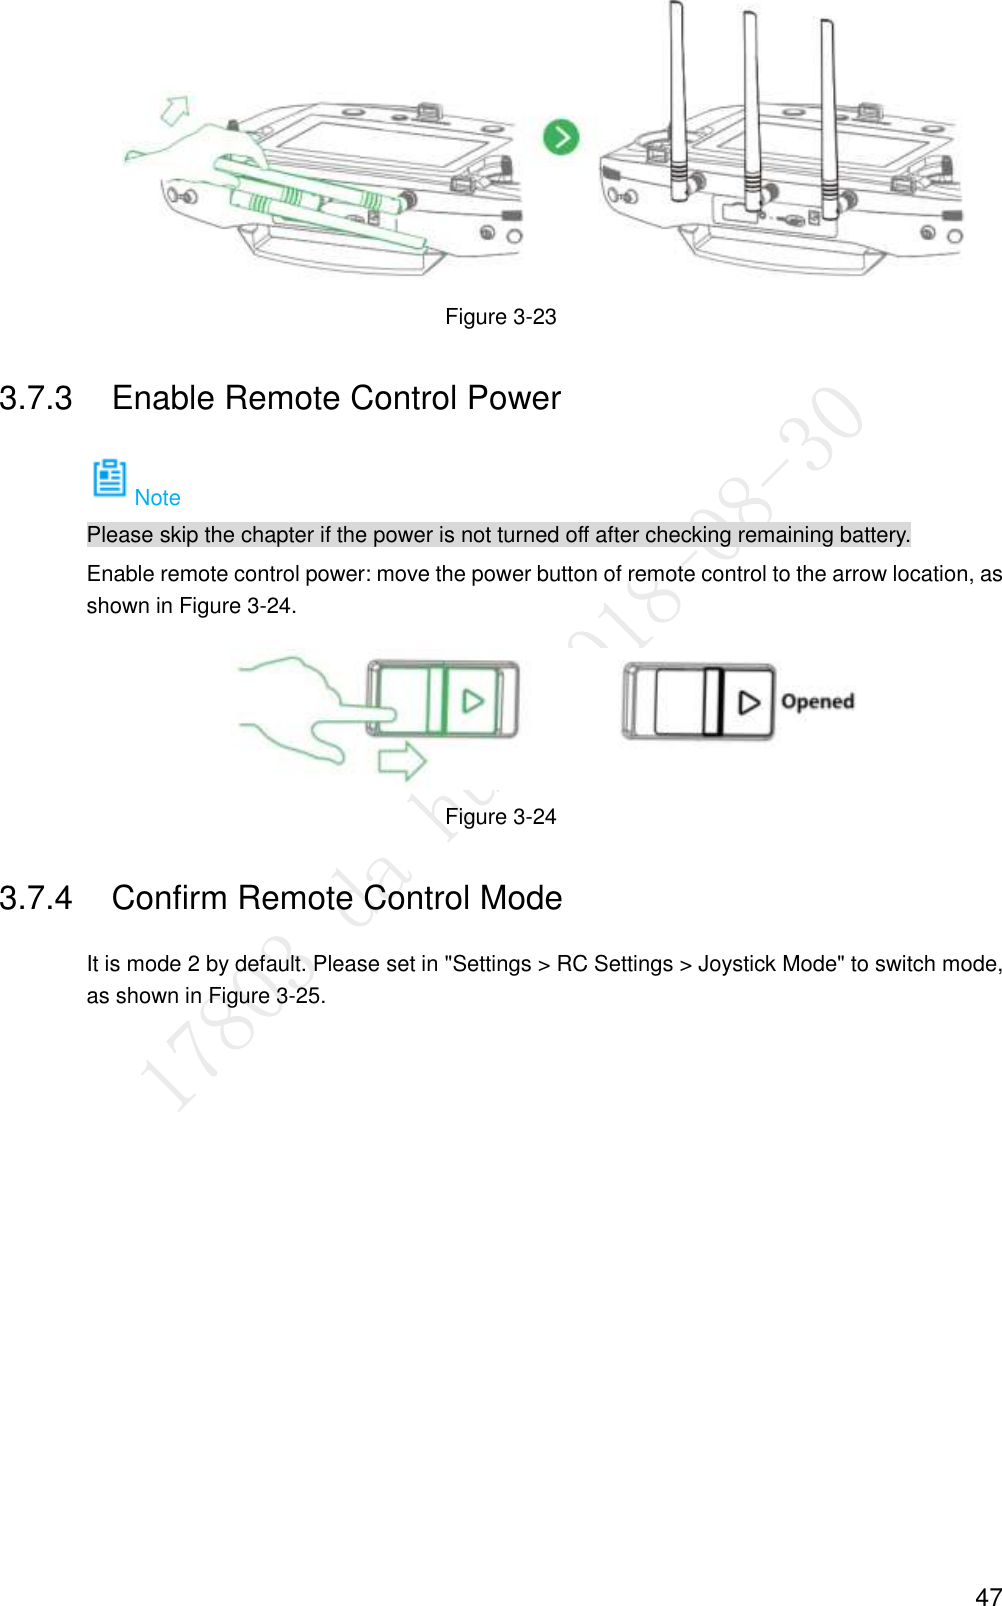  47  Figure 3-23 3.7.3  Enable Remote Control Power Note Please skip the chapter if the power is not turned off after checking remaining battery. Enable remote control power: move the power button of remote control to the arrow location, as shown in Figure 3-24.  Figure 3-24 3.7.4  Confirm Remote Control Mode It is mode 2 by default. Please set in &quot;Settings &gt; RC Settings &gt; Joystick Mode&quot; to switch mode, as shown in Figure 3-25. 